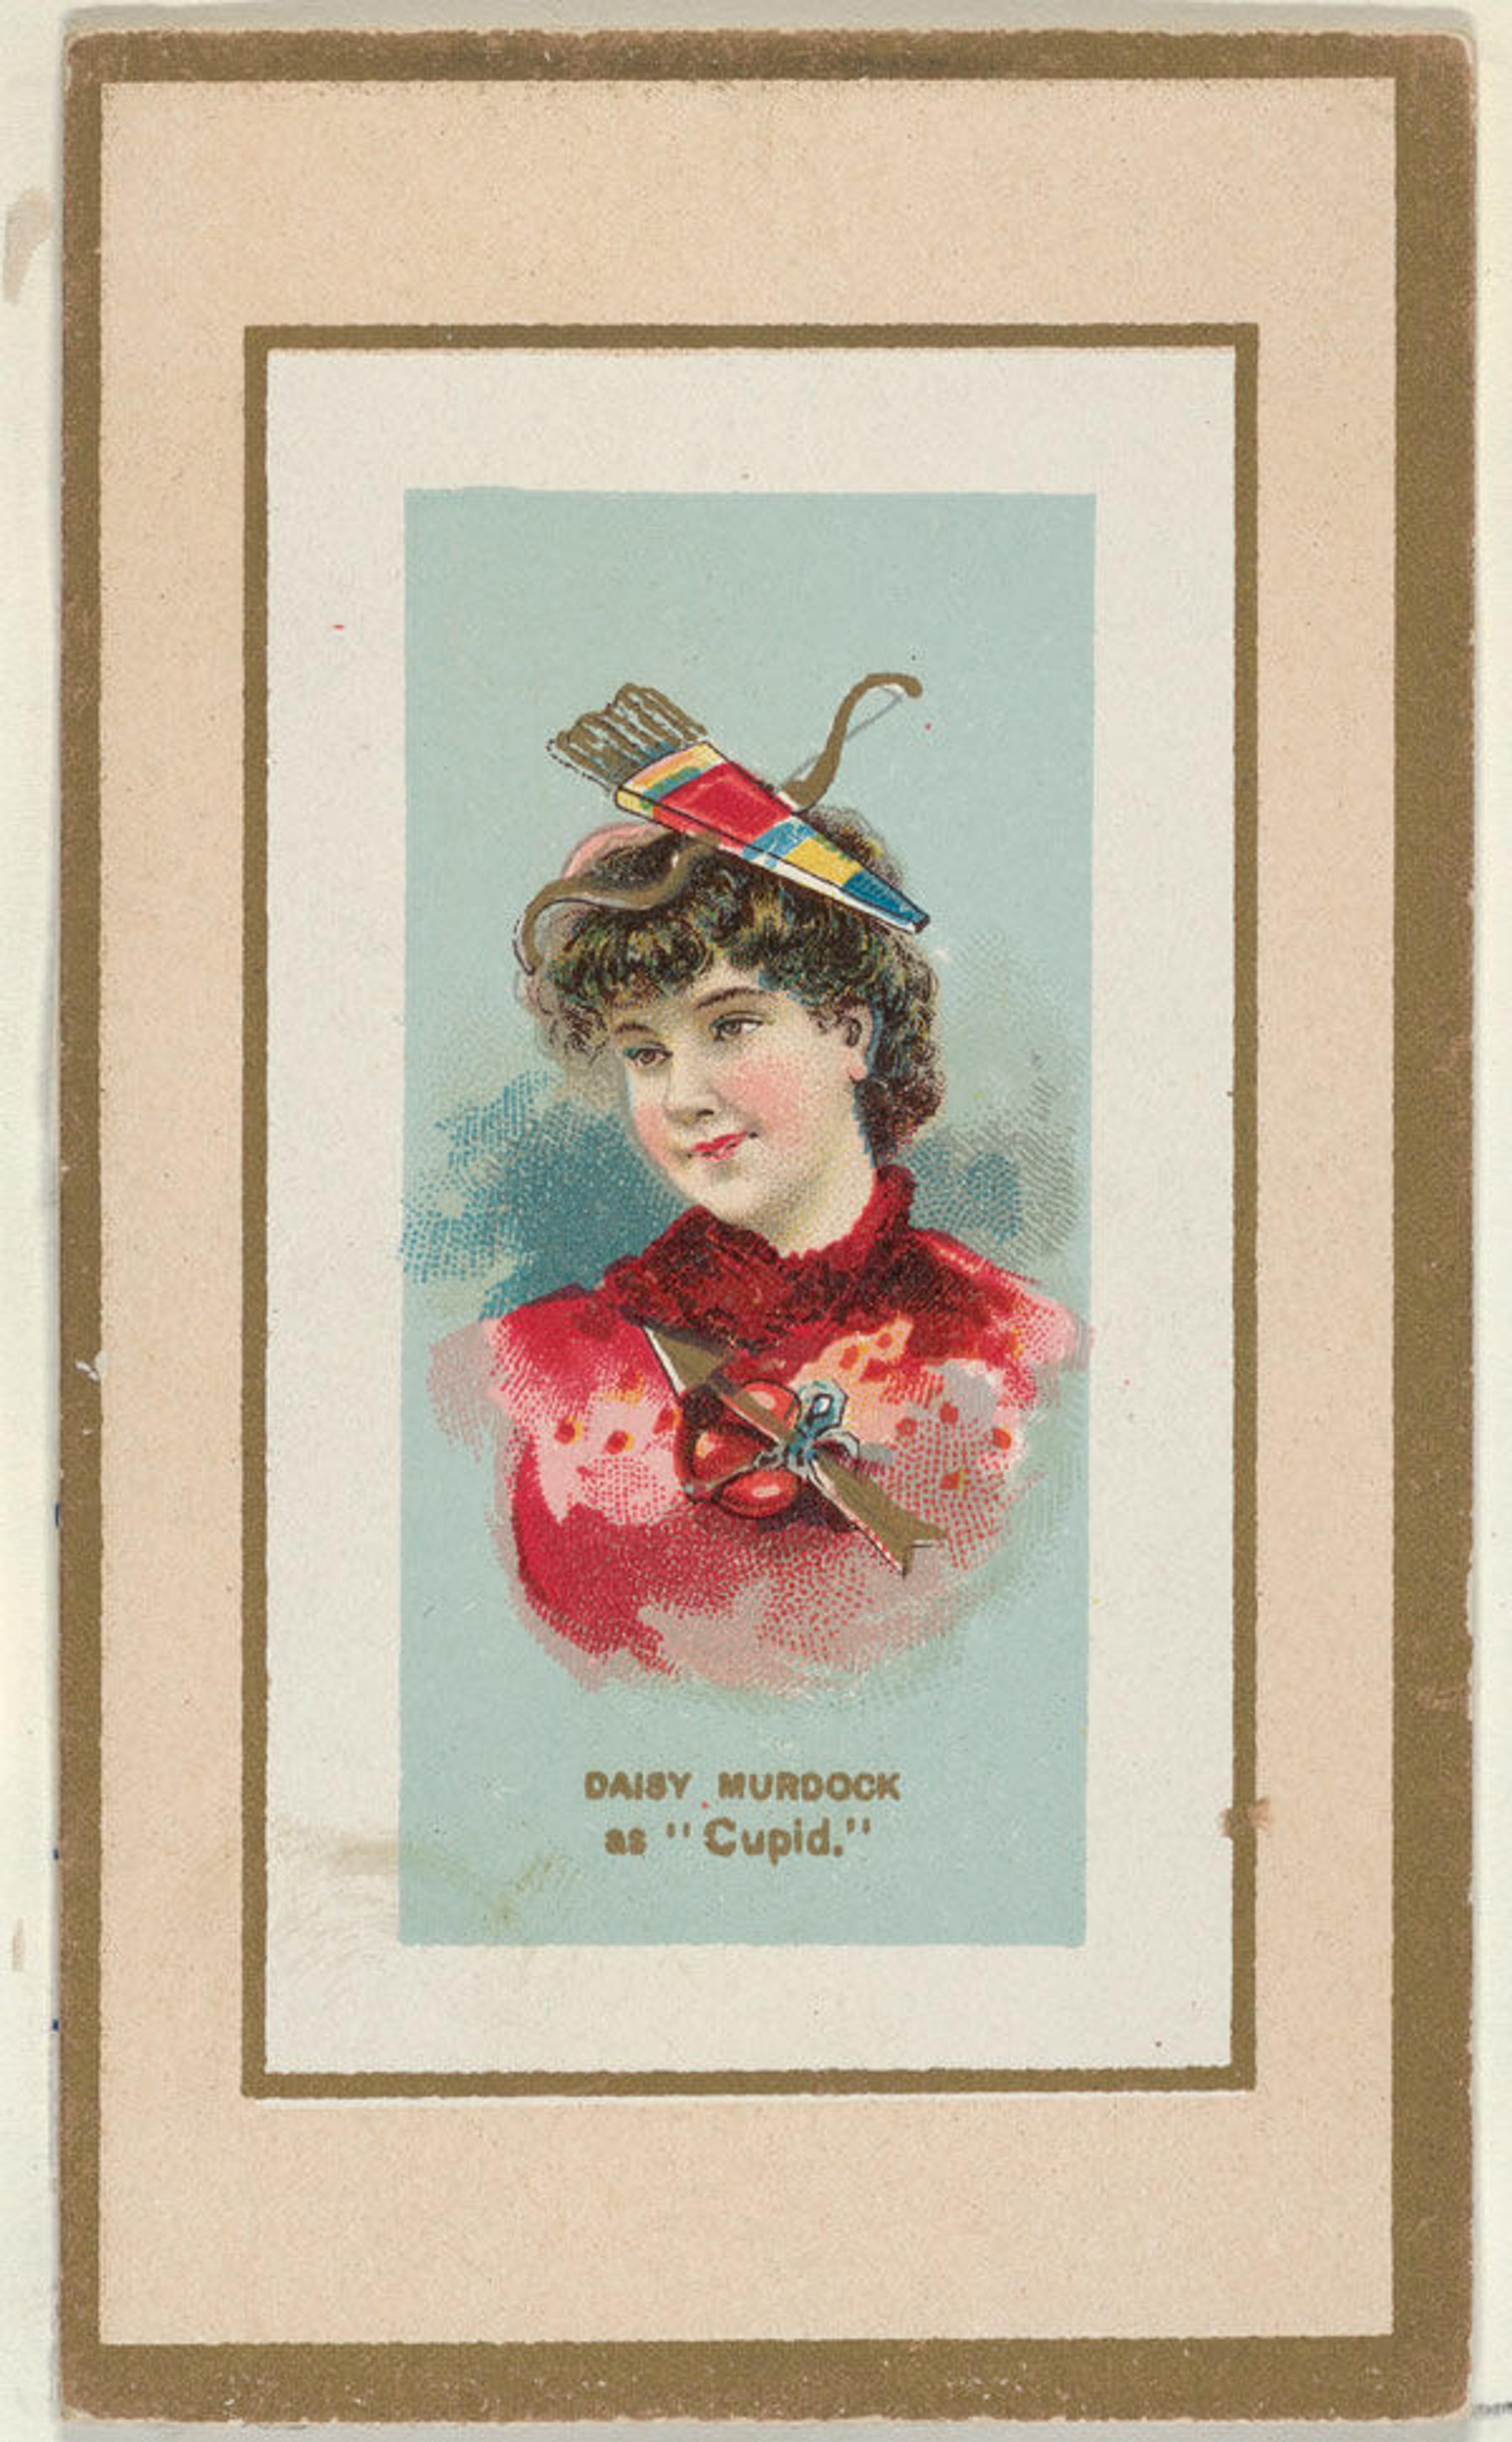 Daisy Murdoch as "Cupid" from the Fancy Dress Ball Costumes series (N107)